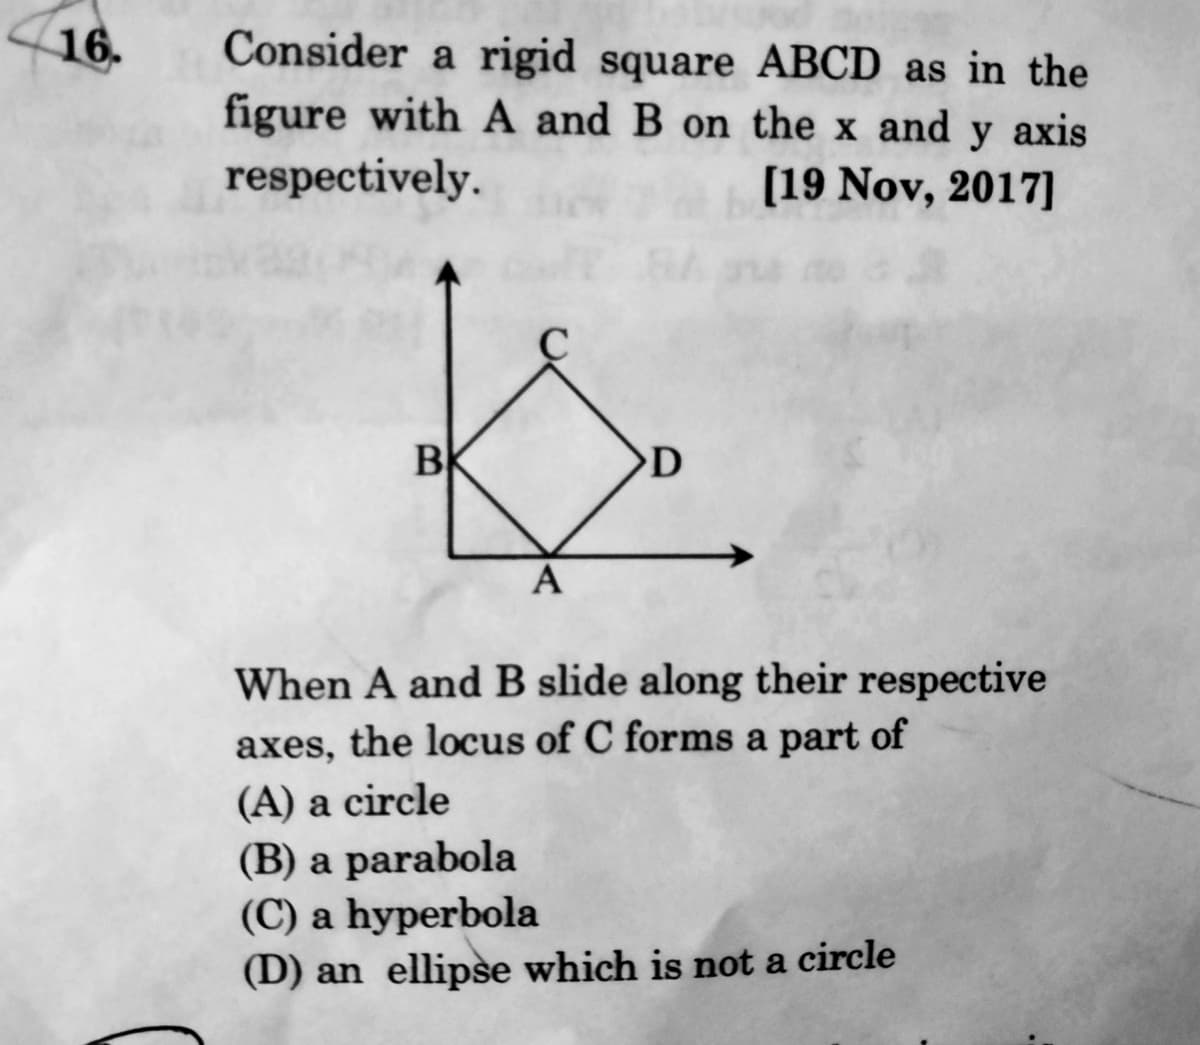 16.
Consider a rigid square ABCD as in the
figure with A and B on the x and y axis
respectively.
[19 Nov, 2017]
B
OD
A
When A and B slide along their respective
axes, the locus of C forms a part of
(A) a circle
(B) a parabola
(C) a hyperbola
(D) an ellipse which is not a circle
